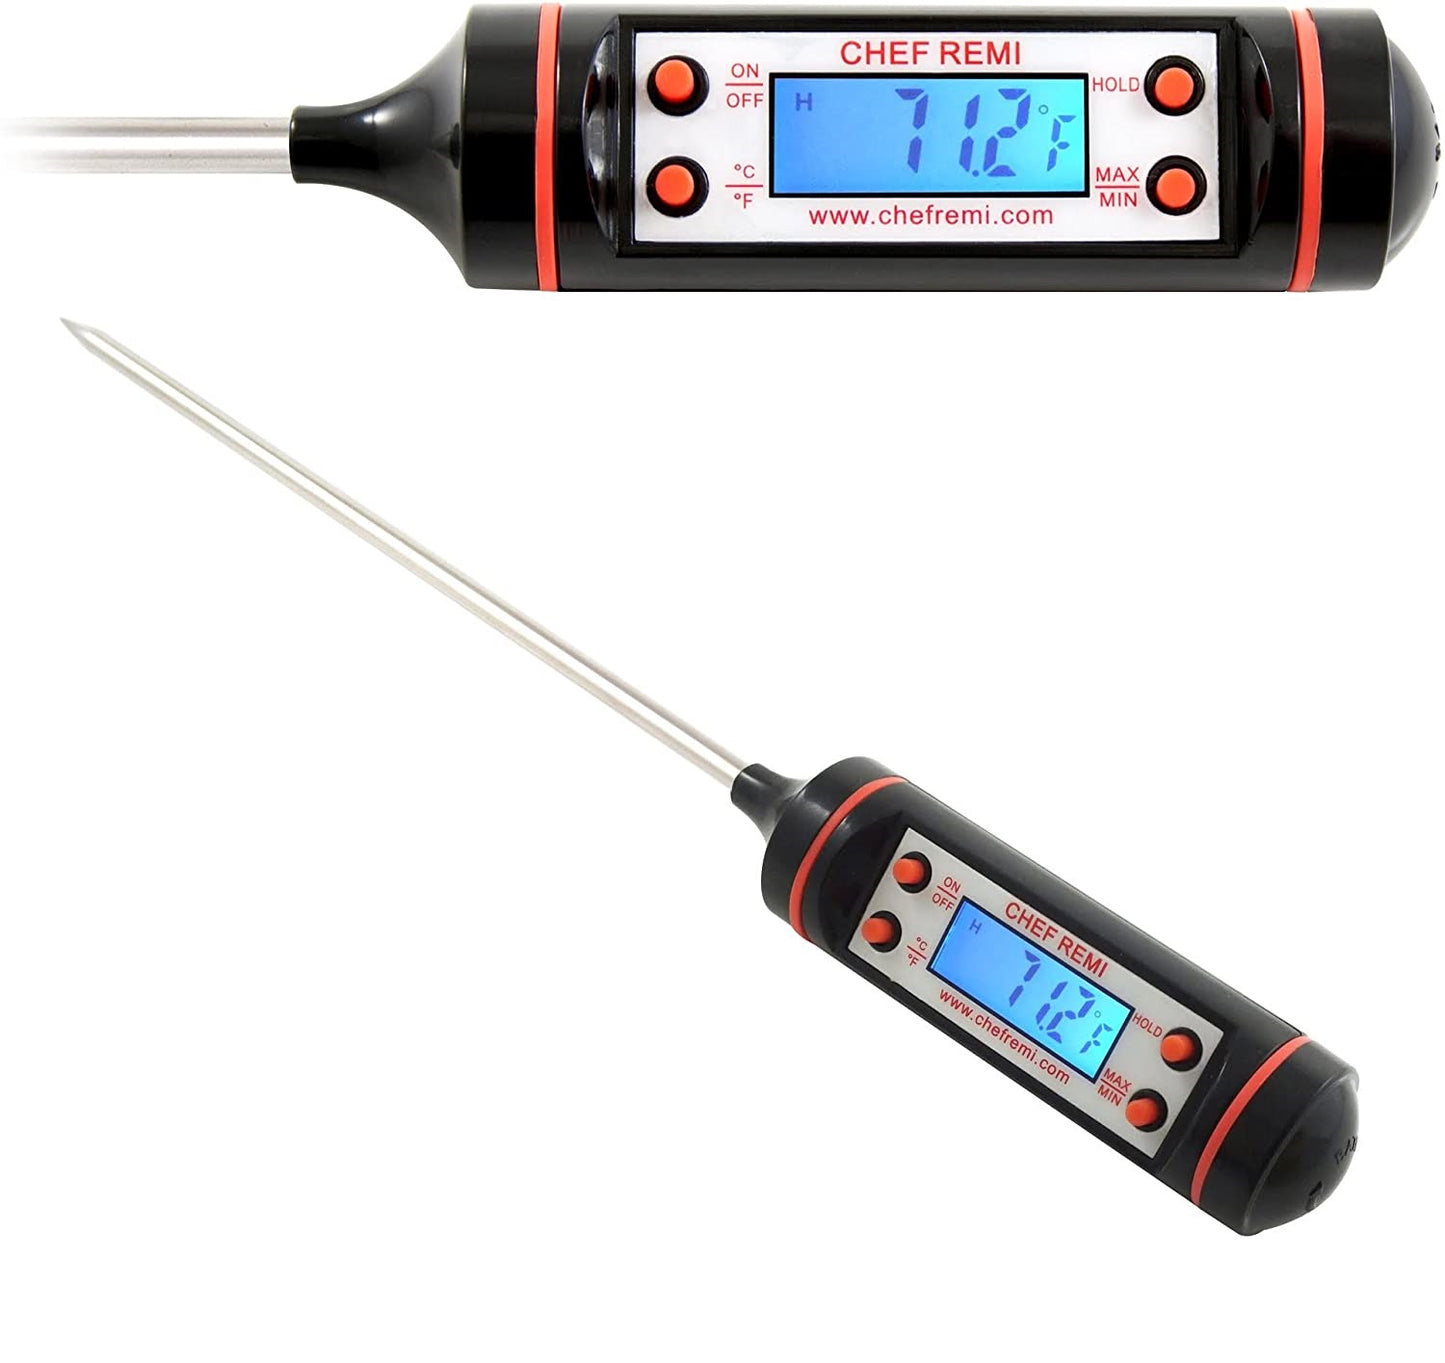 Chef Remi Digital Cooking Thermometer - Instant Read | Best for Turkey, Meat, Oven, Oil, Kitchen, Grill, BBQ, Any Food| Rated No.1 Grill Accessories